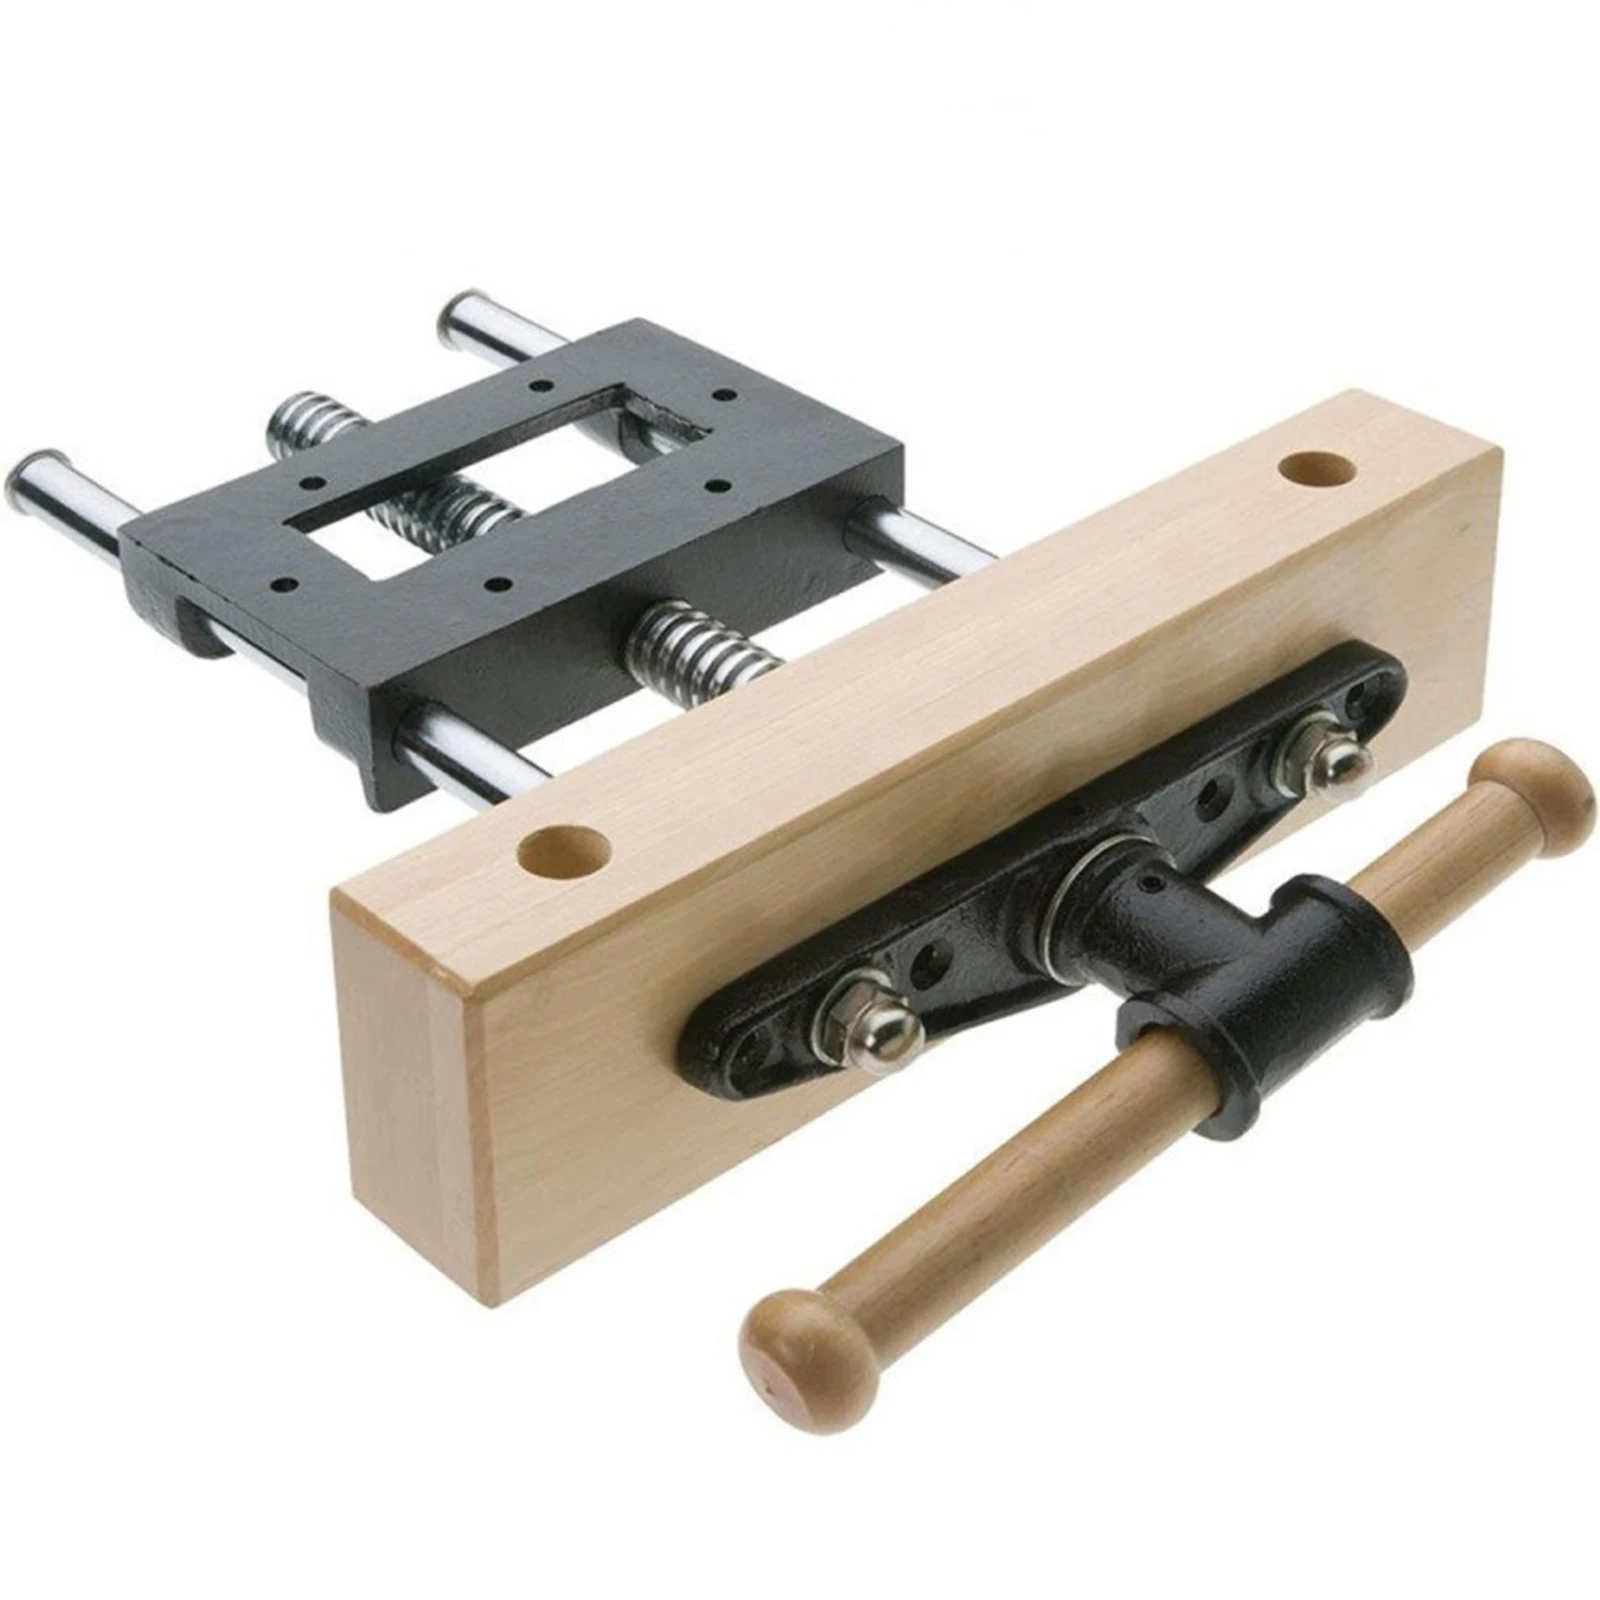 Enlarge Woodworking Vice Wood Vice 18cm High Performance Table Clamp Bed Metal Table Jaw Fixed Repair Vice Tool For Engineering Welding